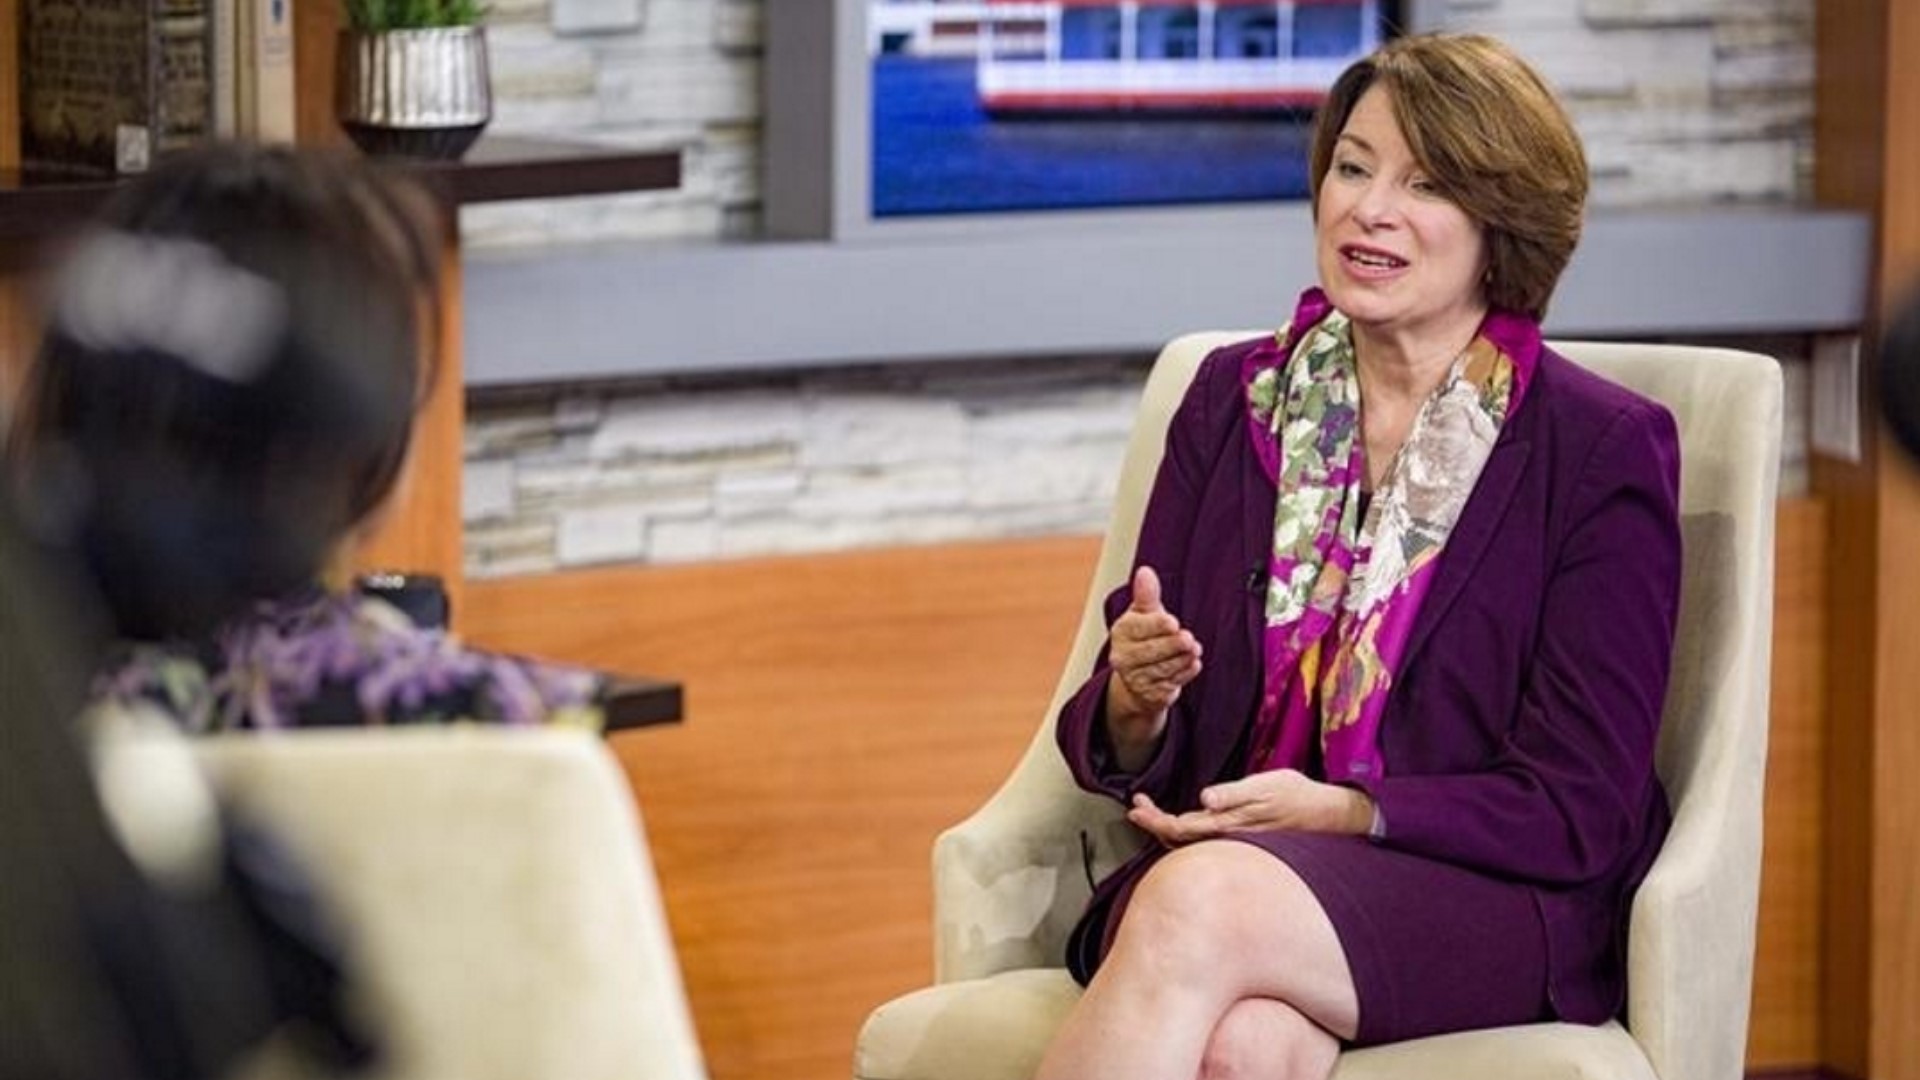 Klobuchar shared the news of her February diagnosis, followed by surgery and radiation in May. Her hope is to encourage people to resume physicals and exams.